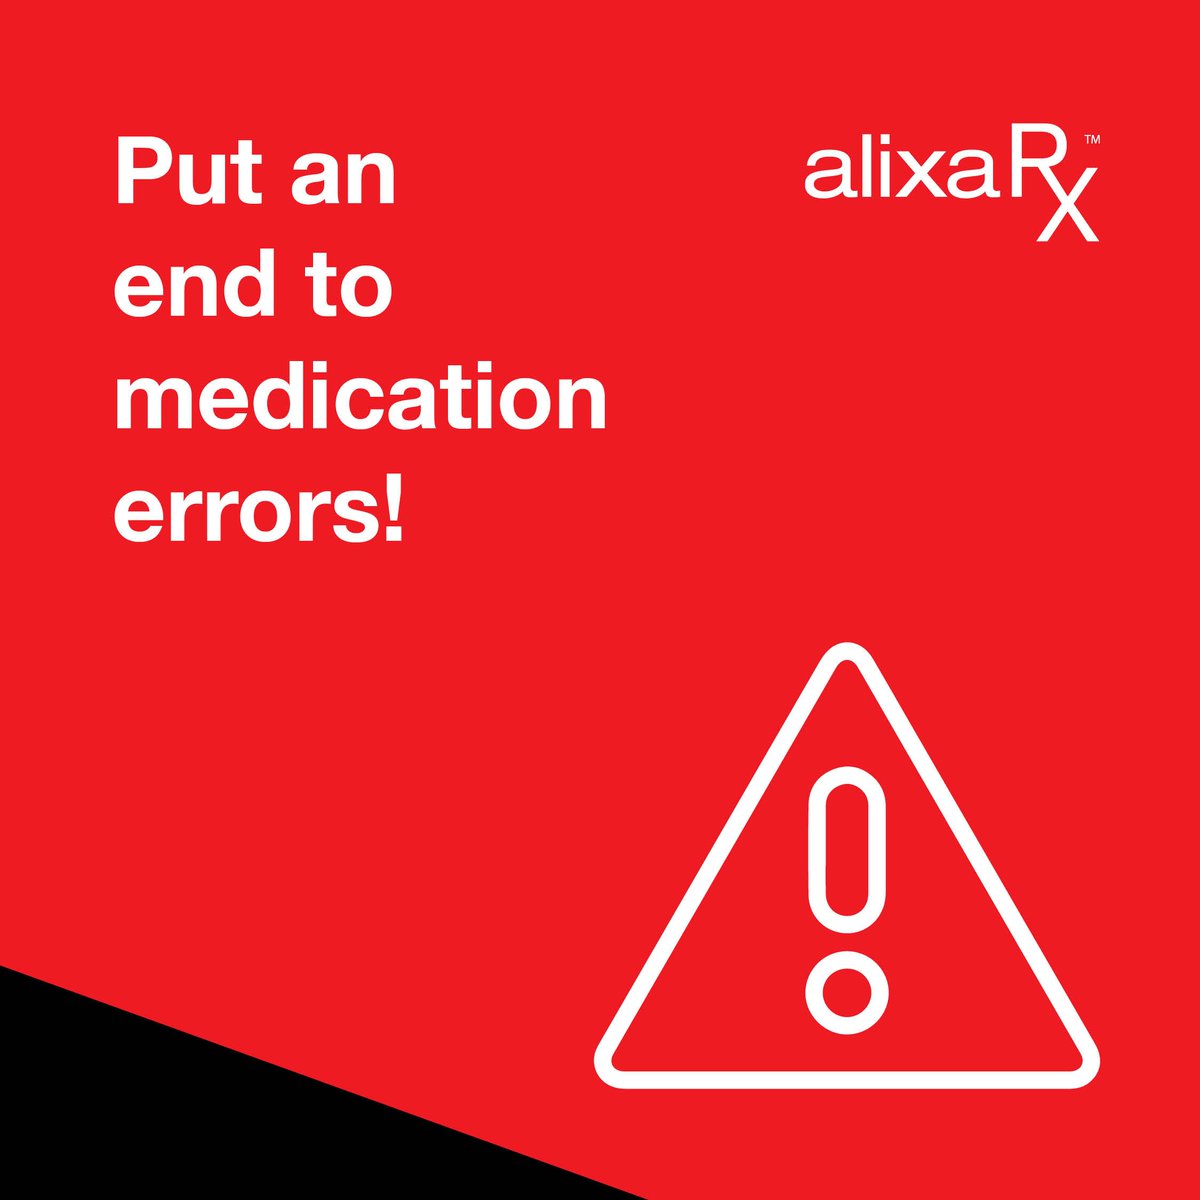 Are medication dispensing errors keeping you up at night? The AlixaRx Access on-site technology has an accuracy of ~99.9998%, surpassing community pharmacies.

Find out more at 
AlixaRx.com

#AlixaRx #PharmacyServices